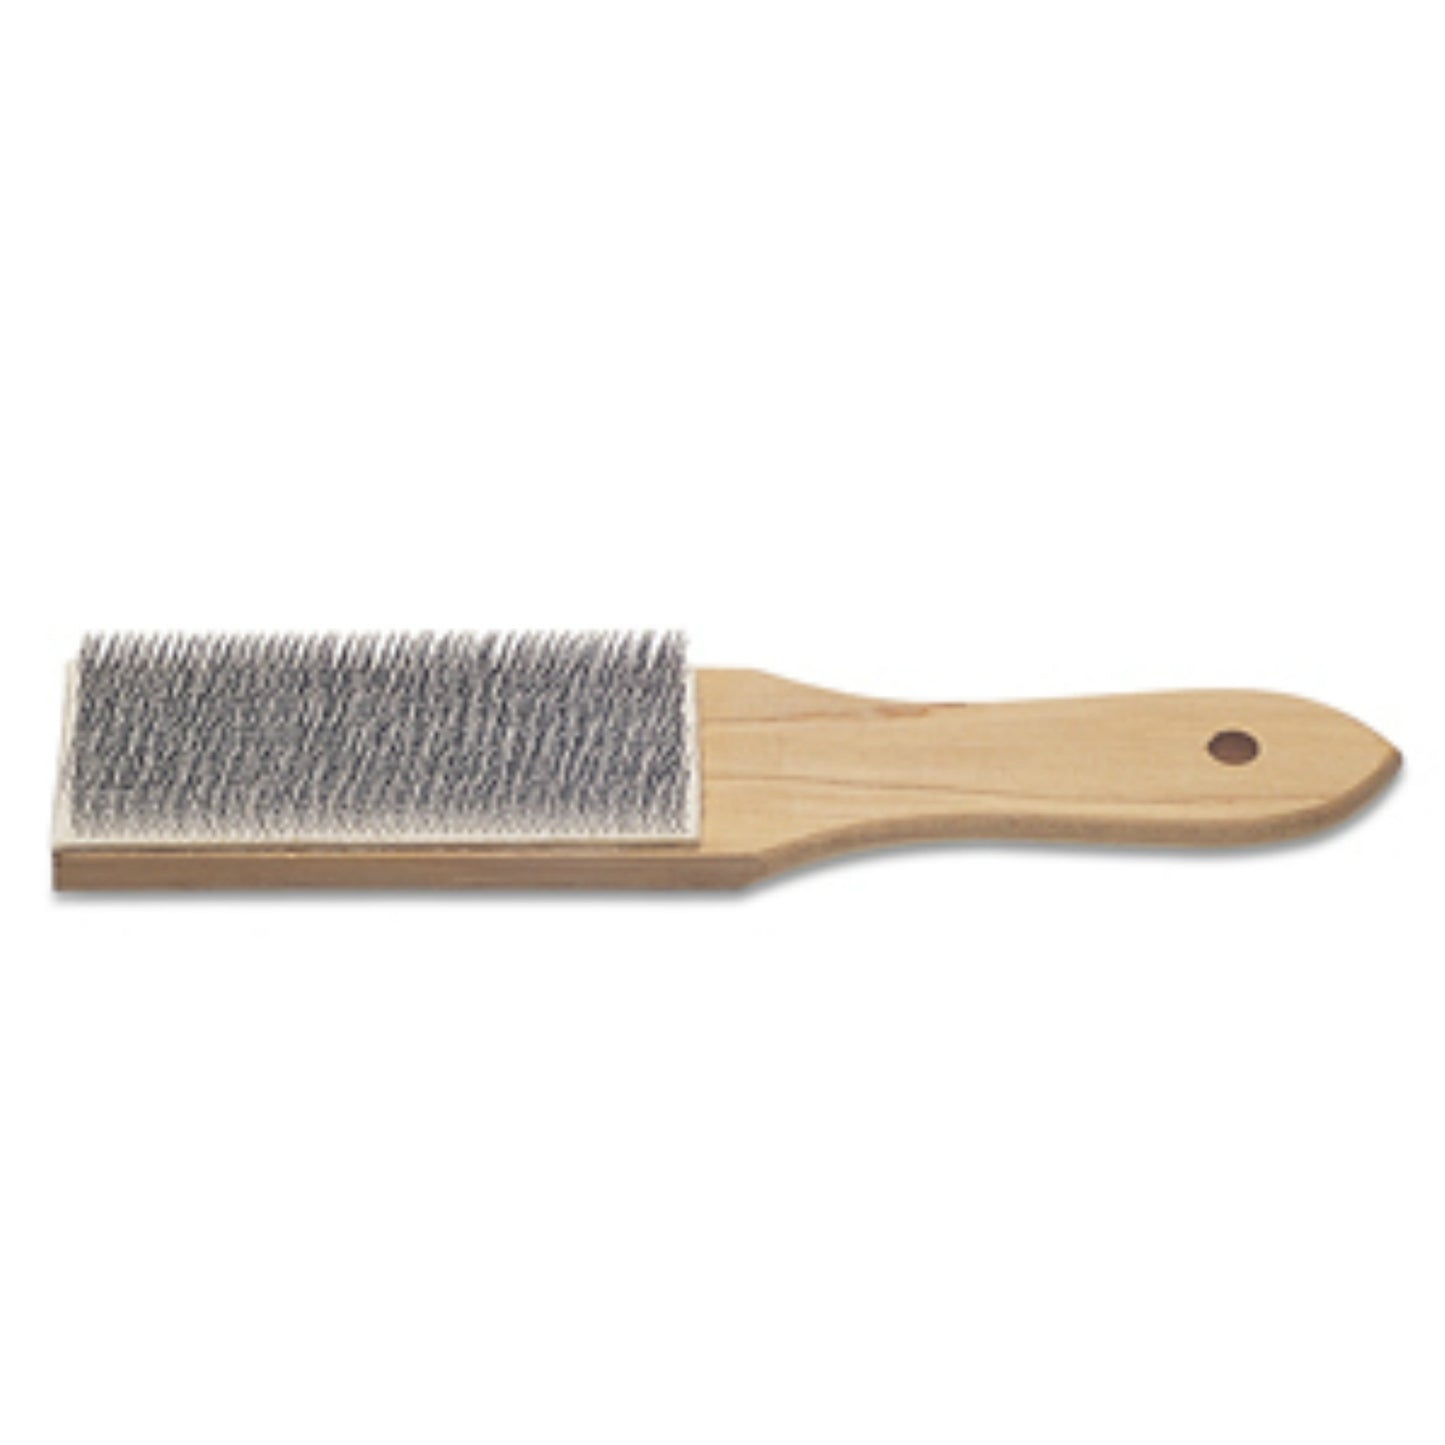 File Cleaner - Wooden Handle